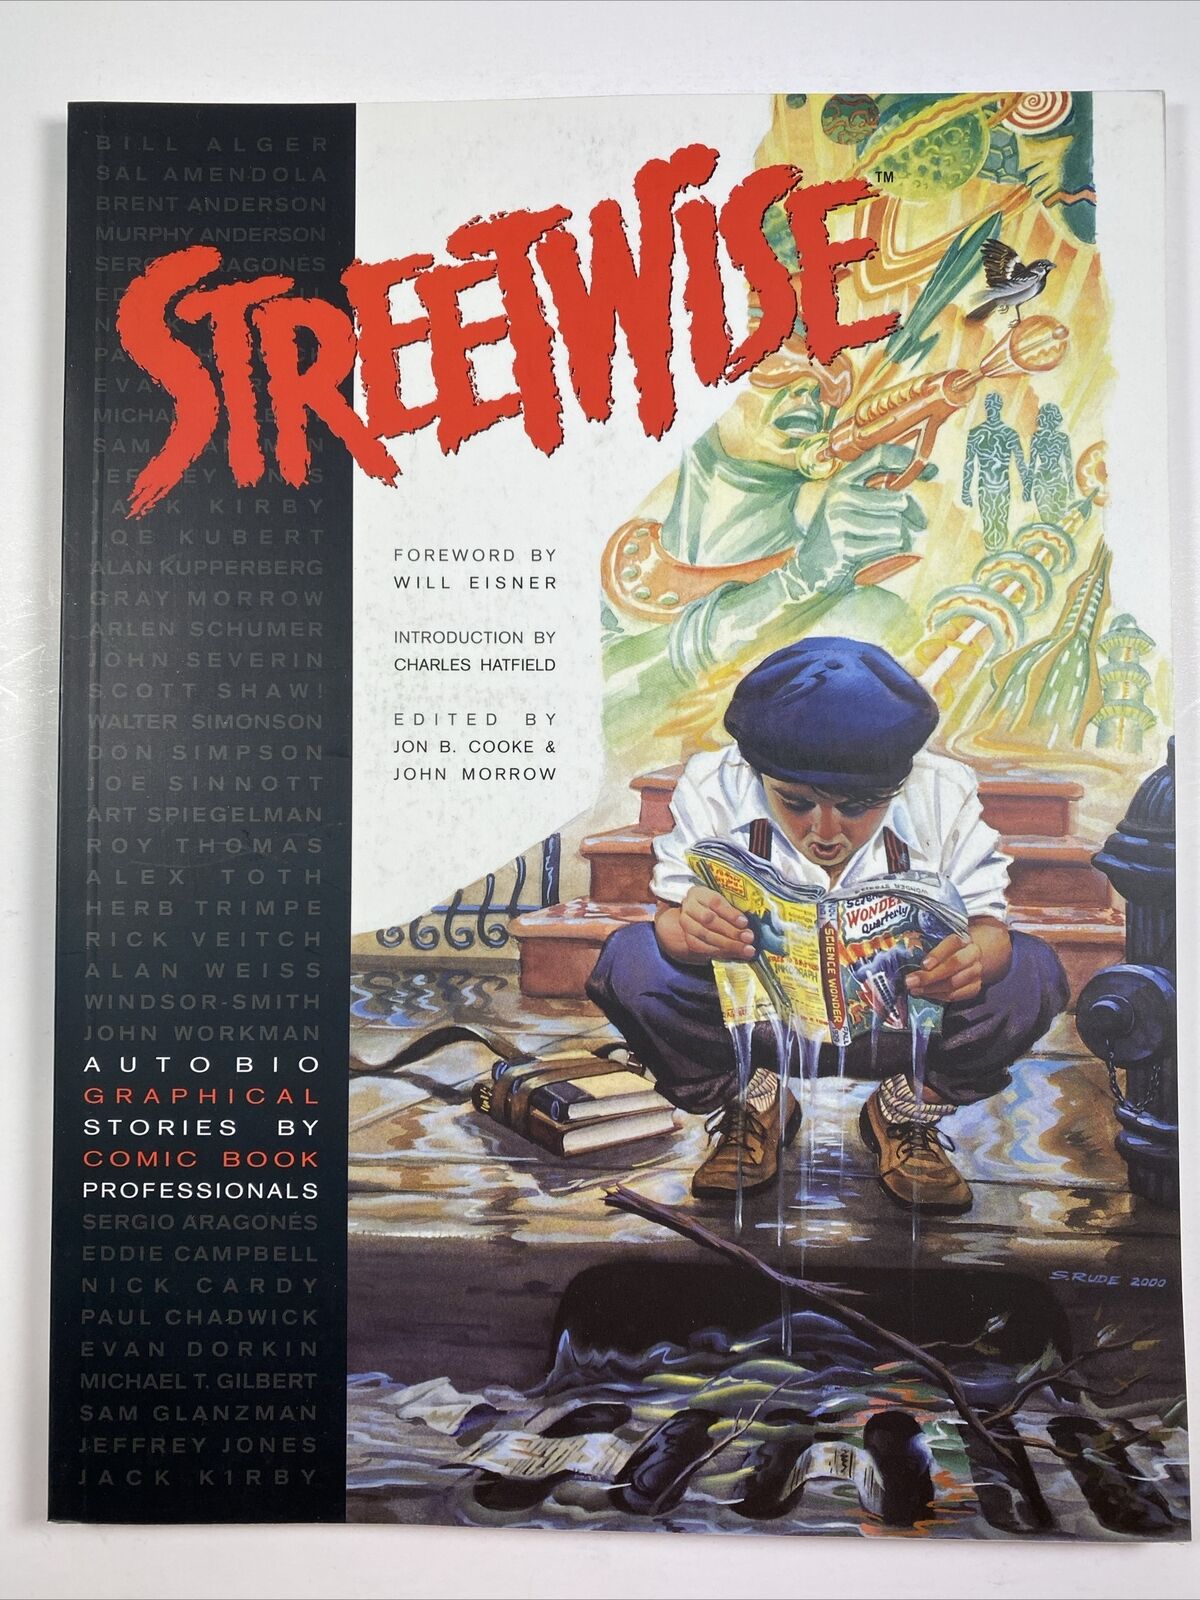 Streetwise-Graphic Novel-autobiographical stories by comic book artists book